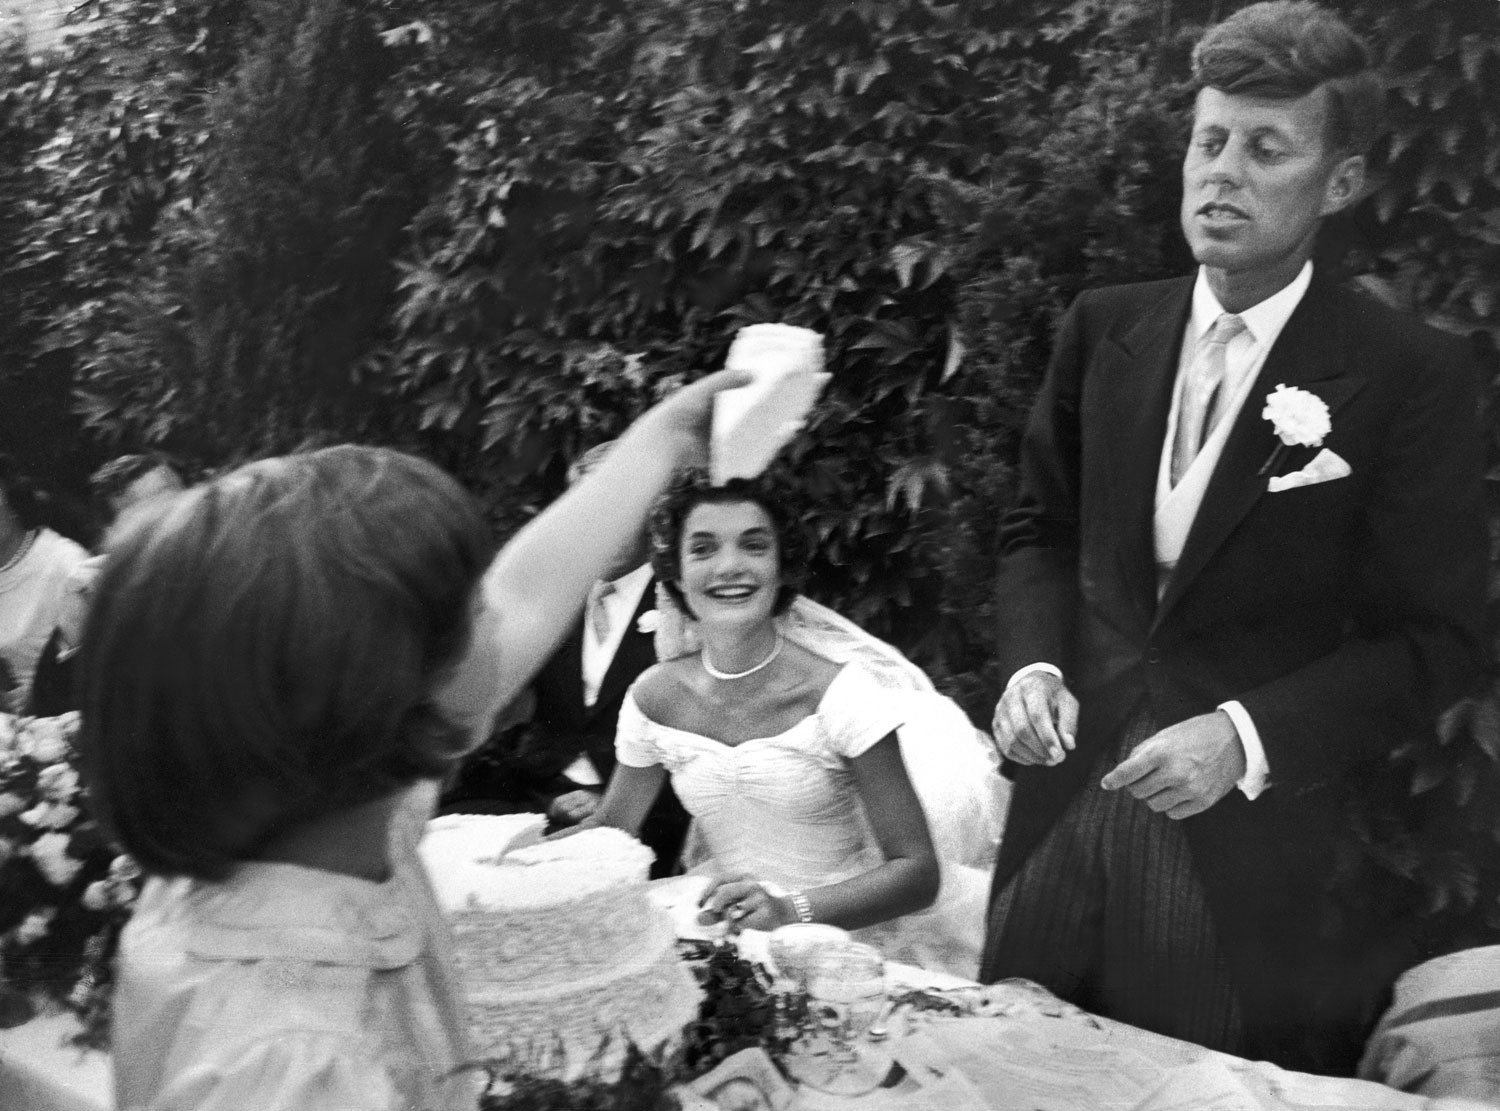 "Slice of wedding cake is offered bridegroom by flower girl Janet at the luncheon. Kennedy had already had some cake so did not want any more."